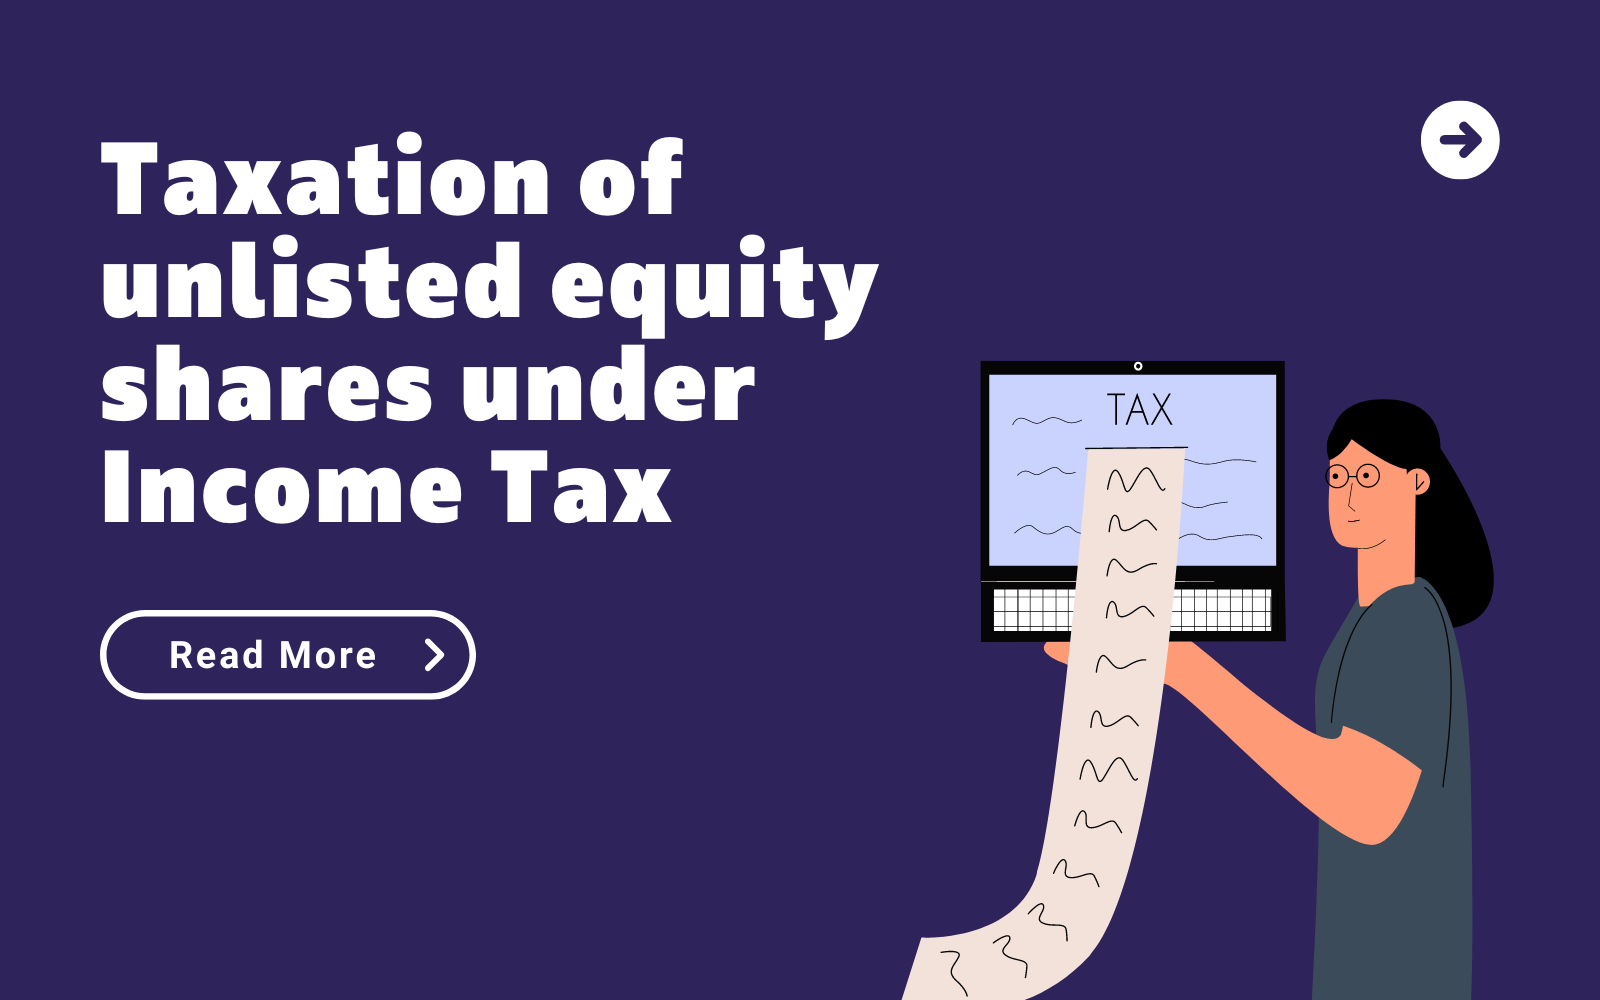 taxation-of-unlisted-equity-shares-under-income-tax-advalyze